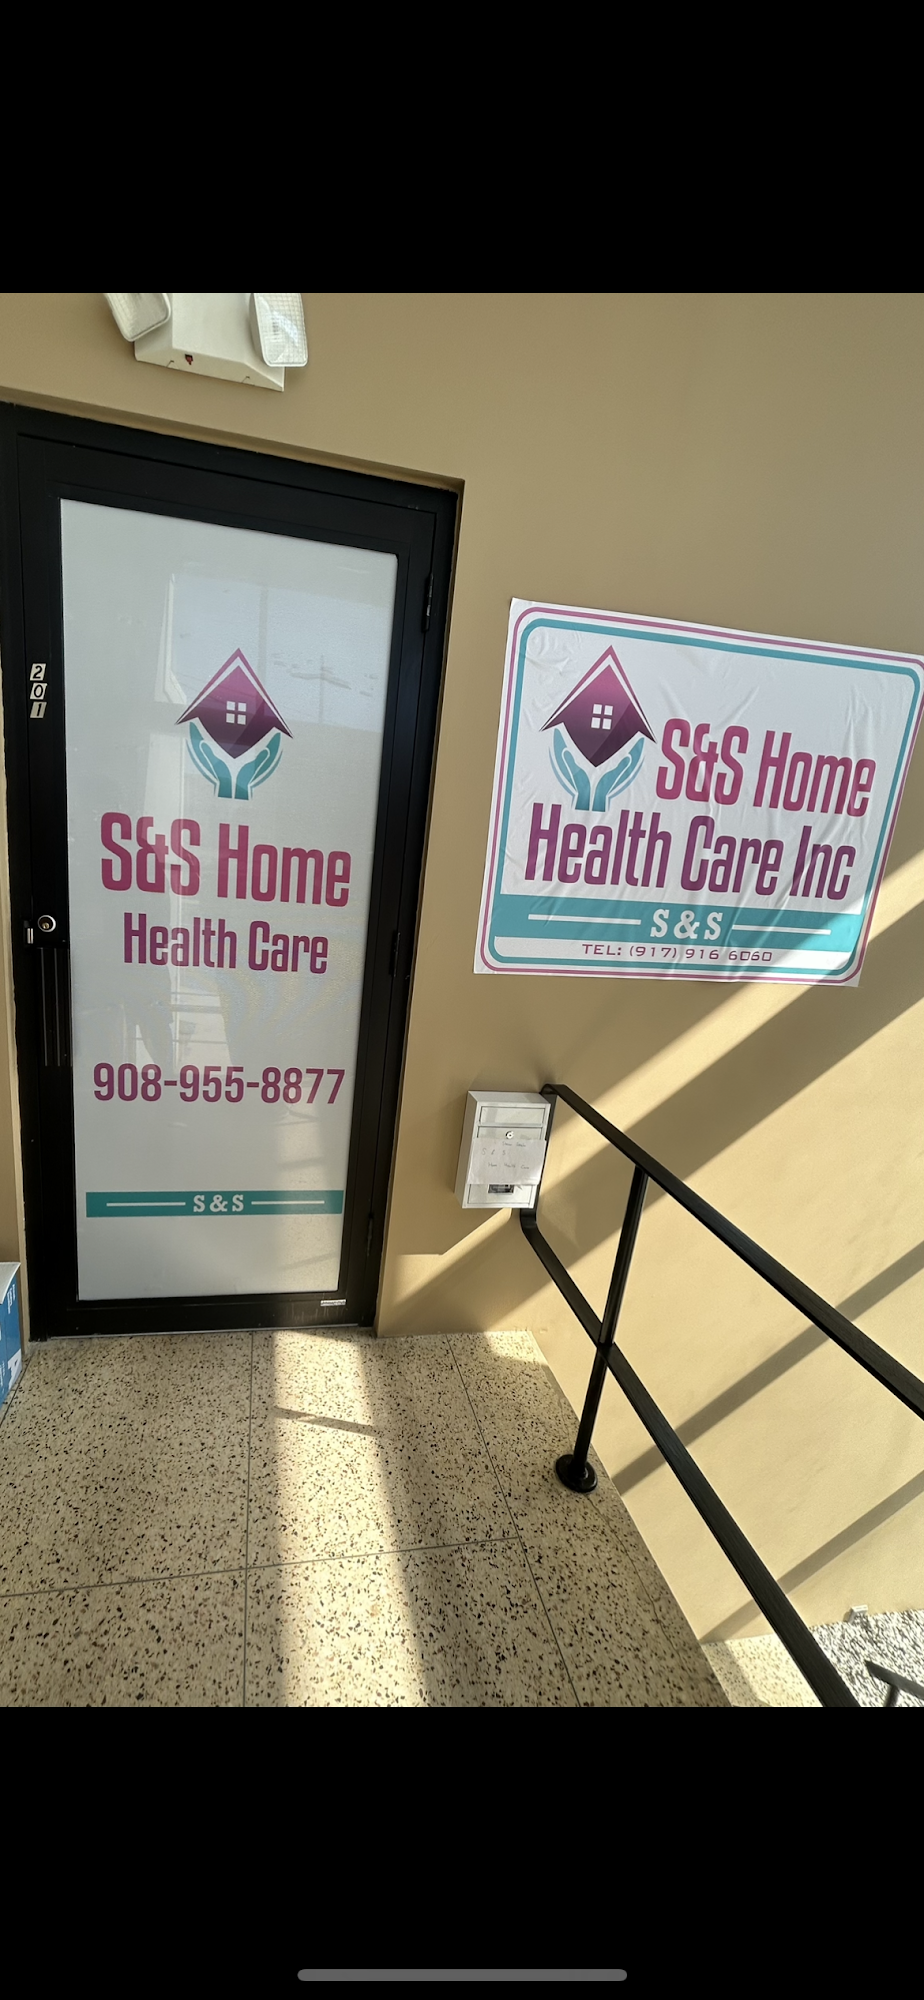 S&S Home Health Care Agency